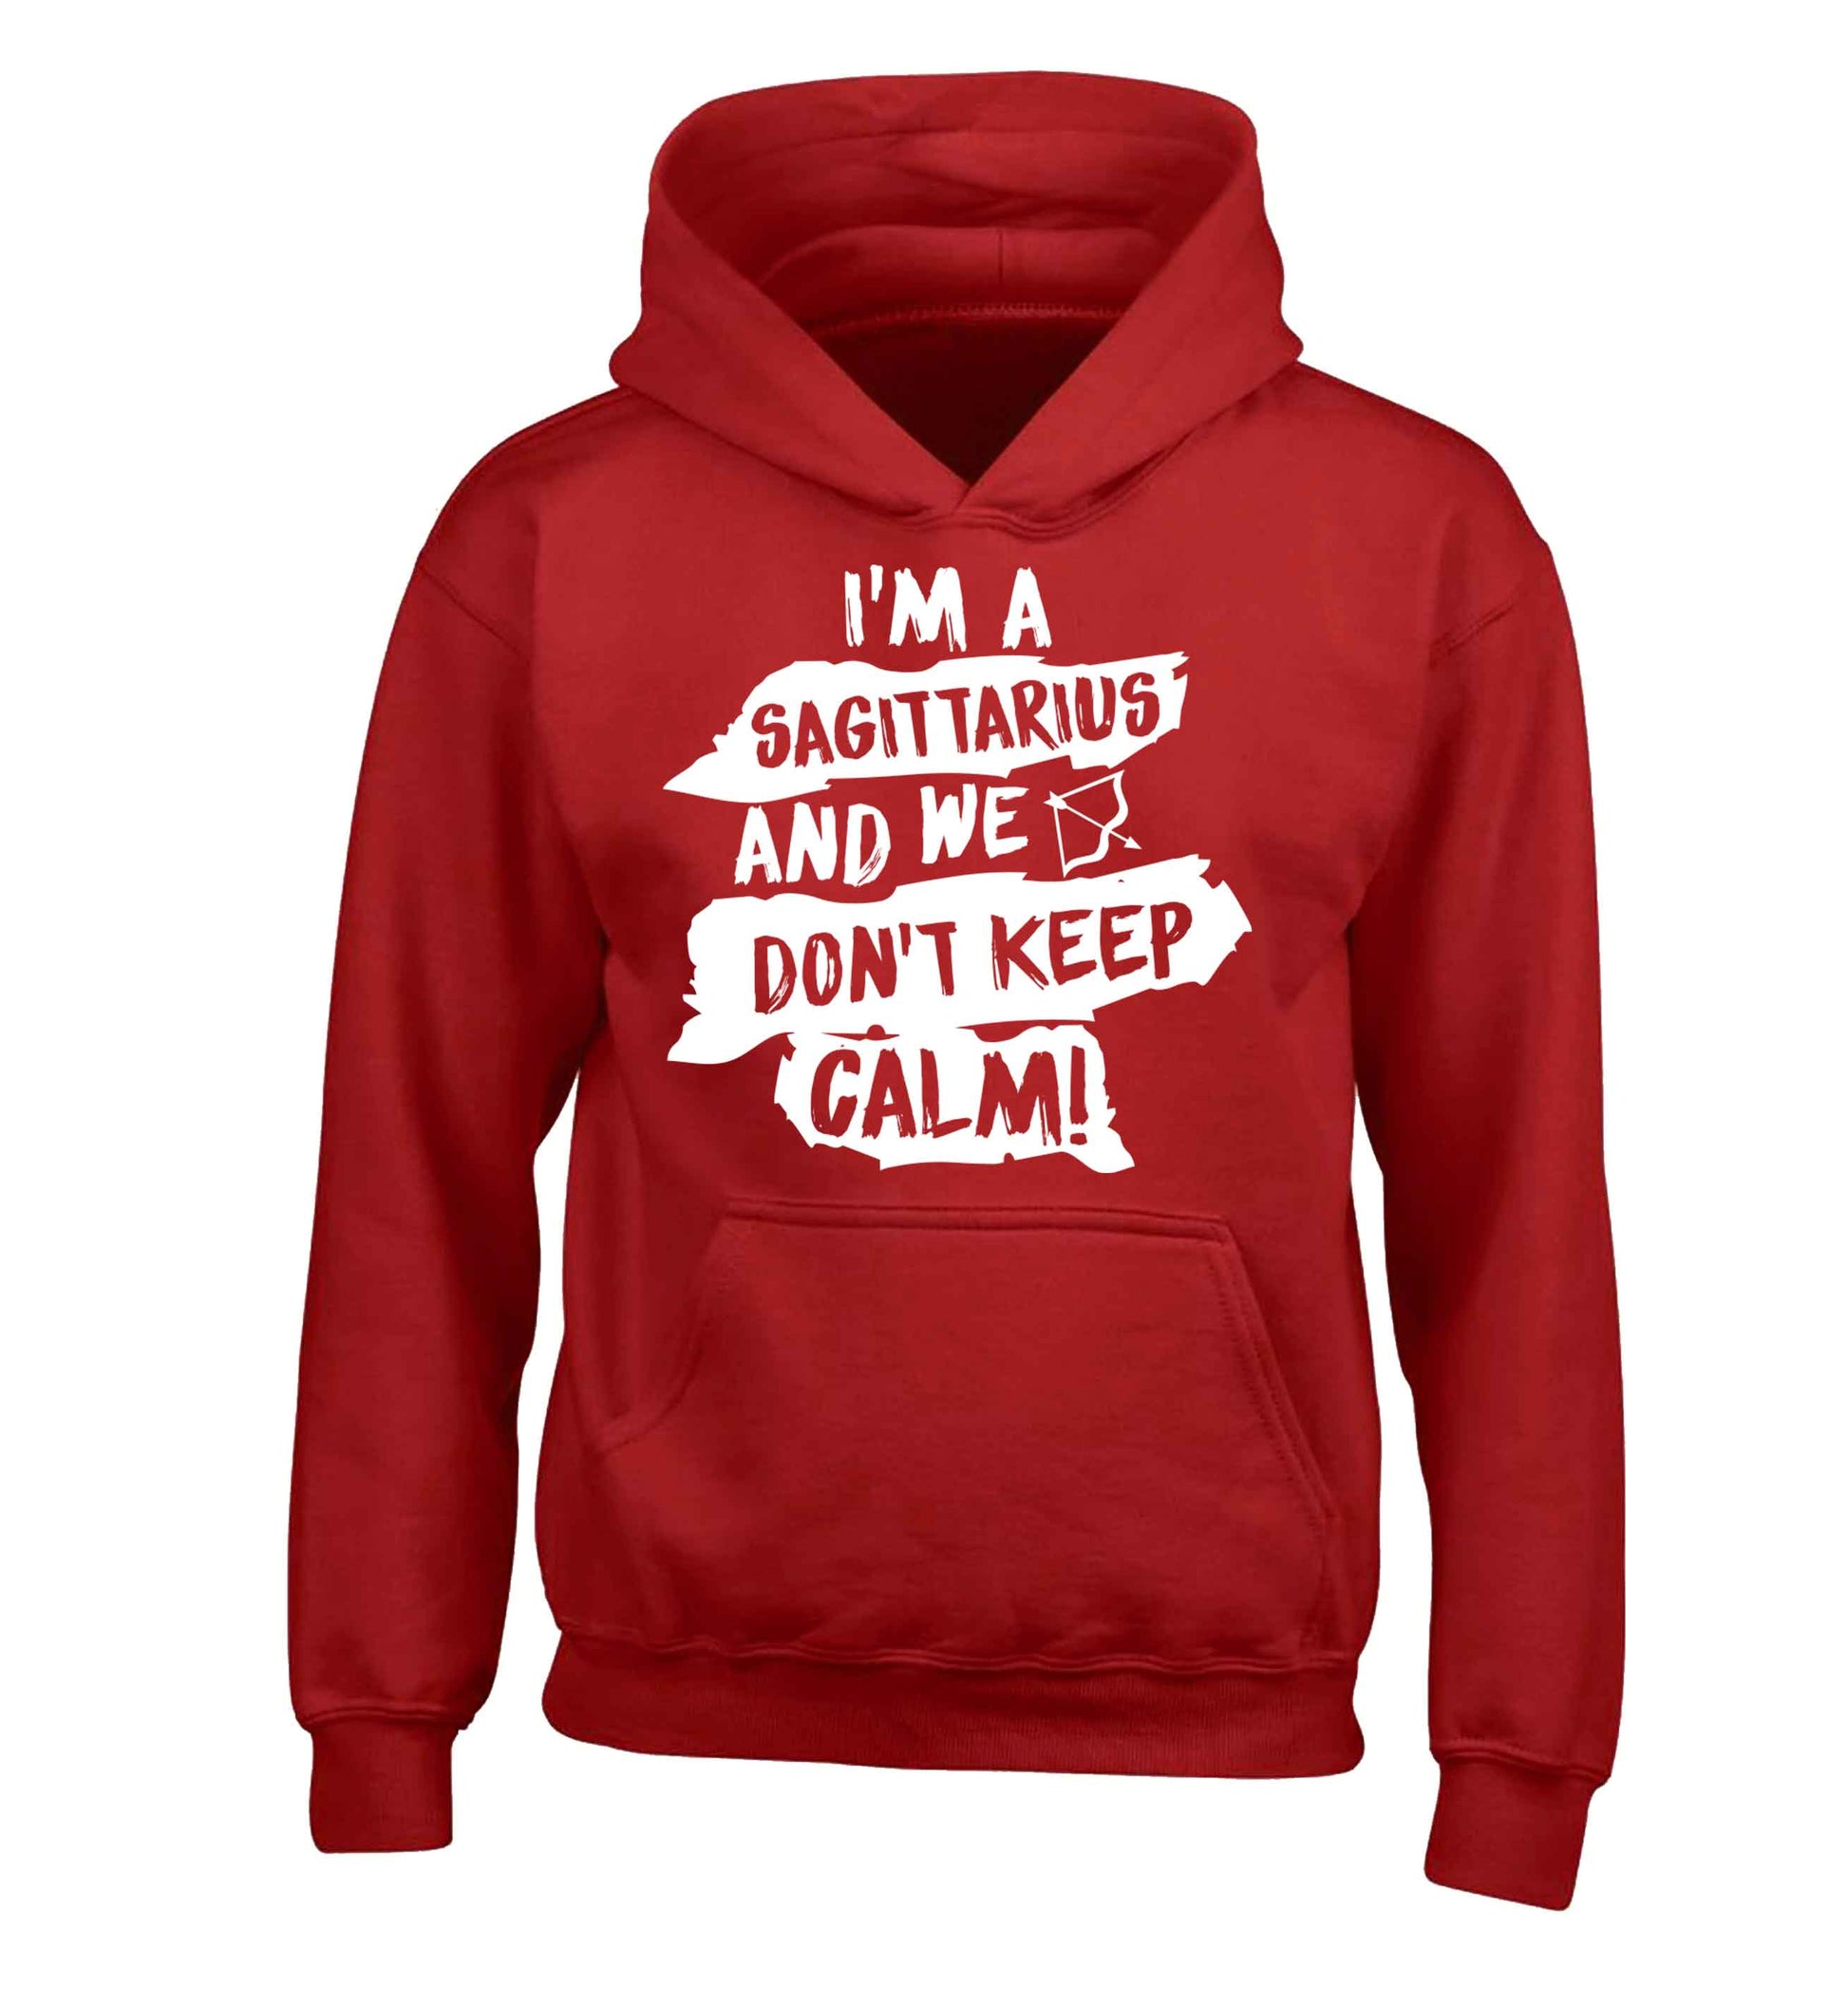 I'm a sagittarius and we don't keep calm children's red hoodie 12-13 Years